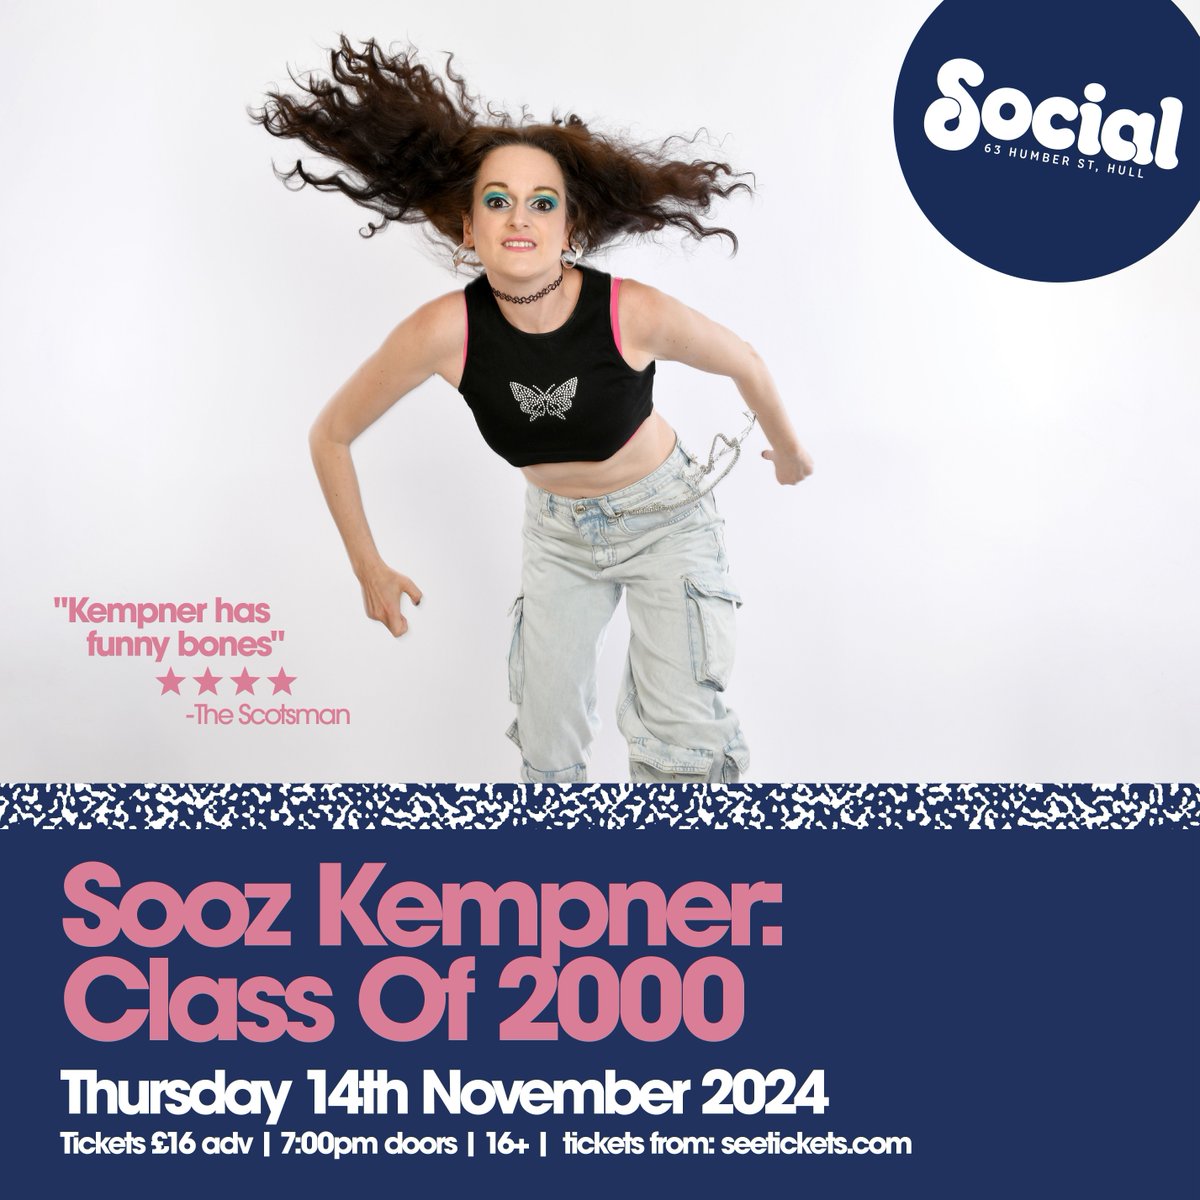 NEW SHOW // ON SALE NOW @SoozUK: Class Of 2000 on Thu 14 November 🎟 bit.ly/SoozKempner The award-winning stand-up comedian and viral sensation is hitting the road with a brand-new tour bringing together her sell-out fringe 2023 hit and its much anticipated 2024 follow-up